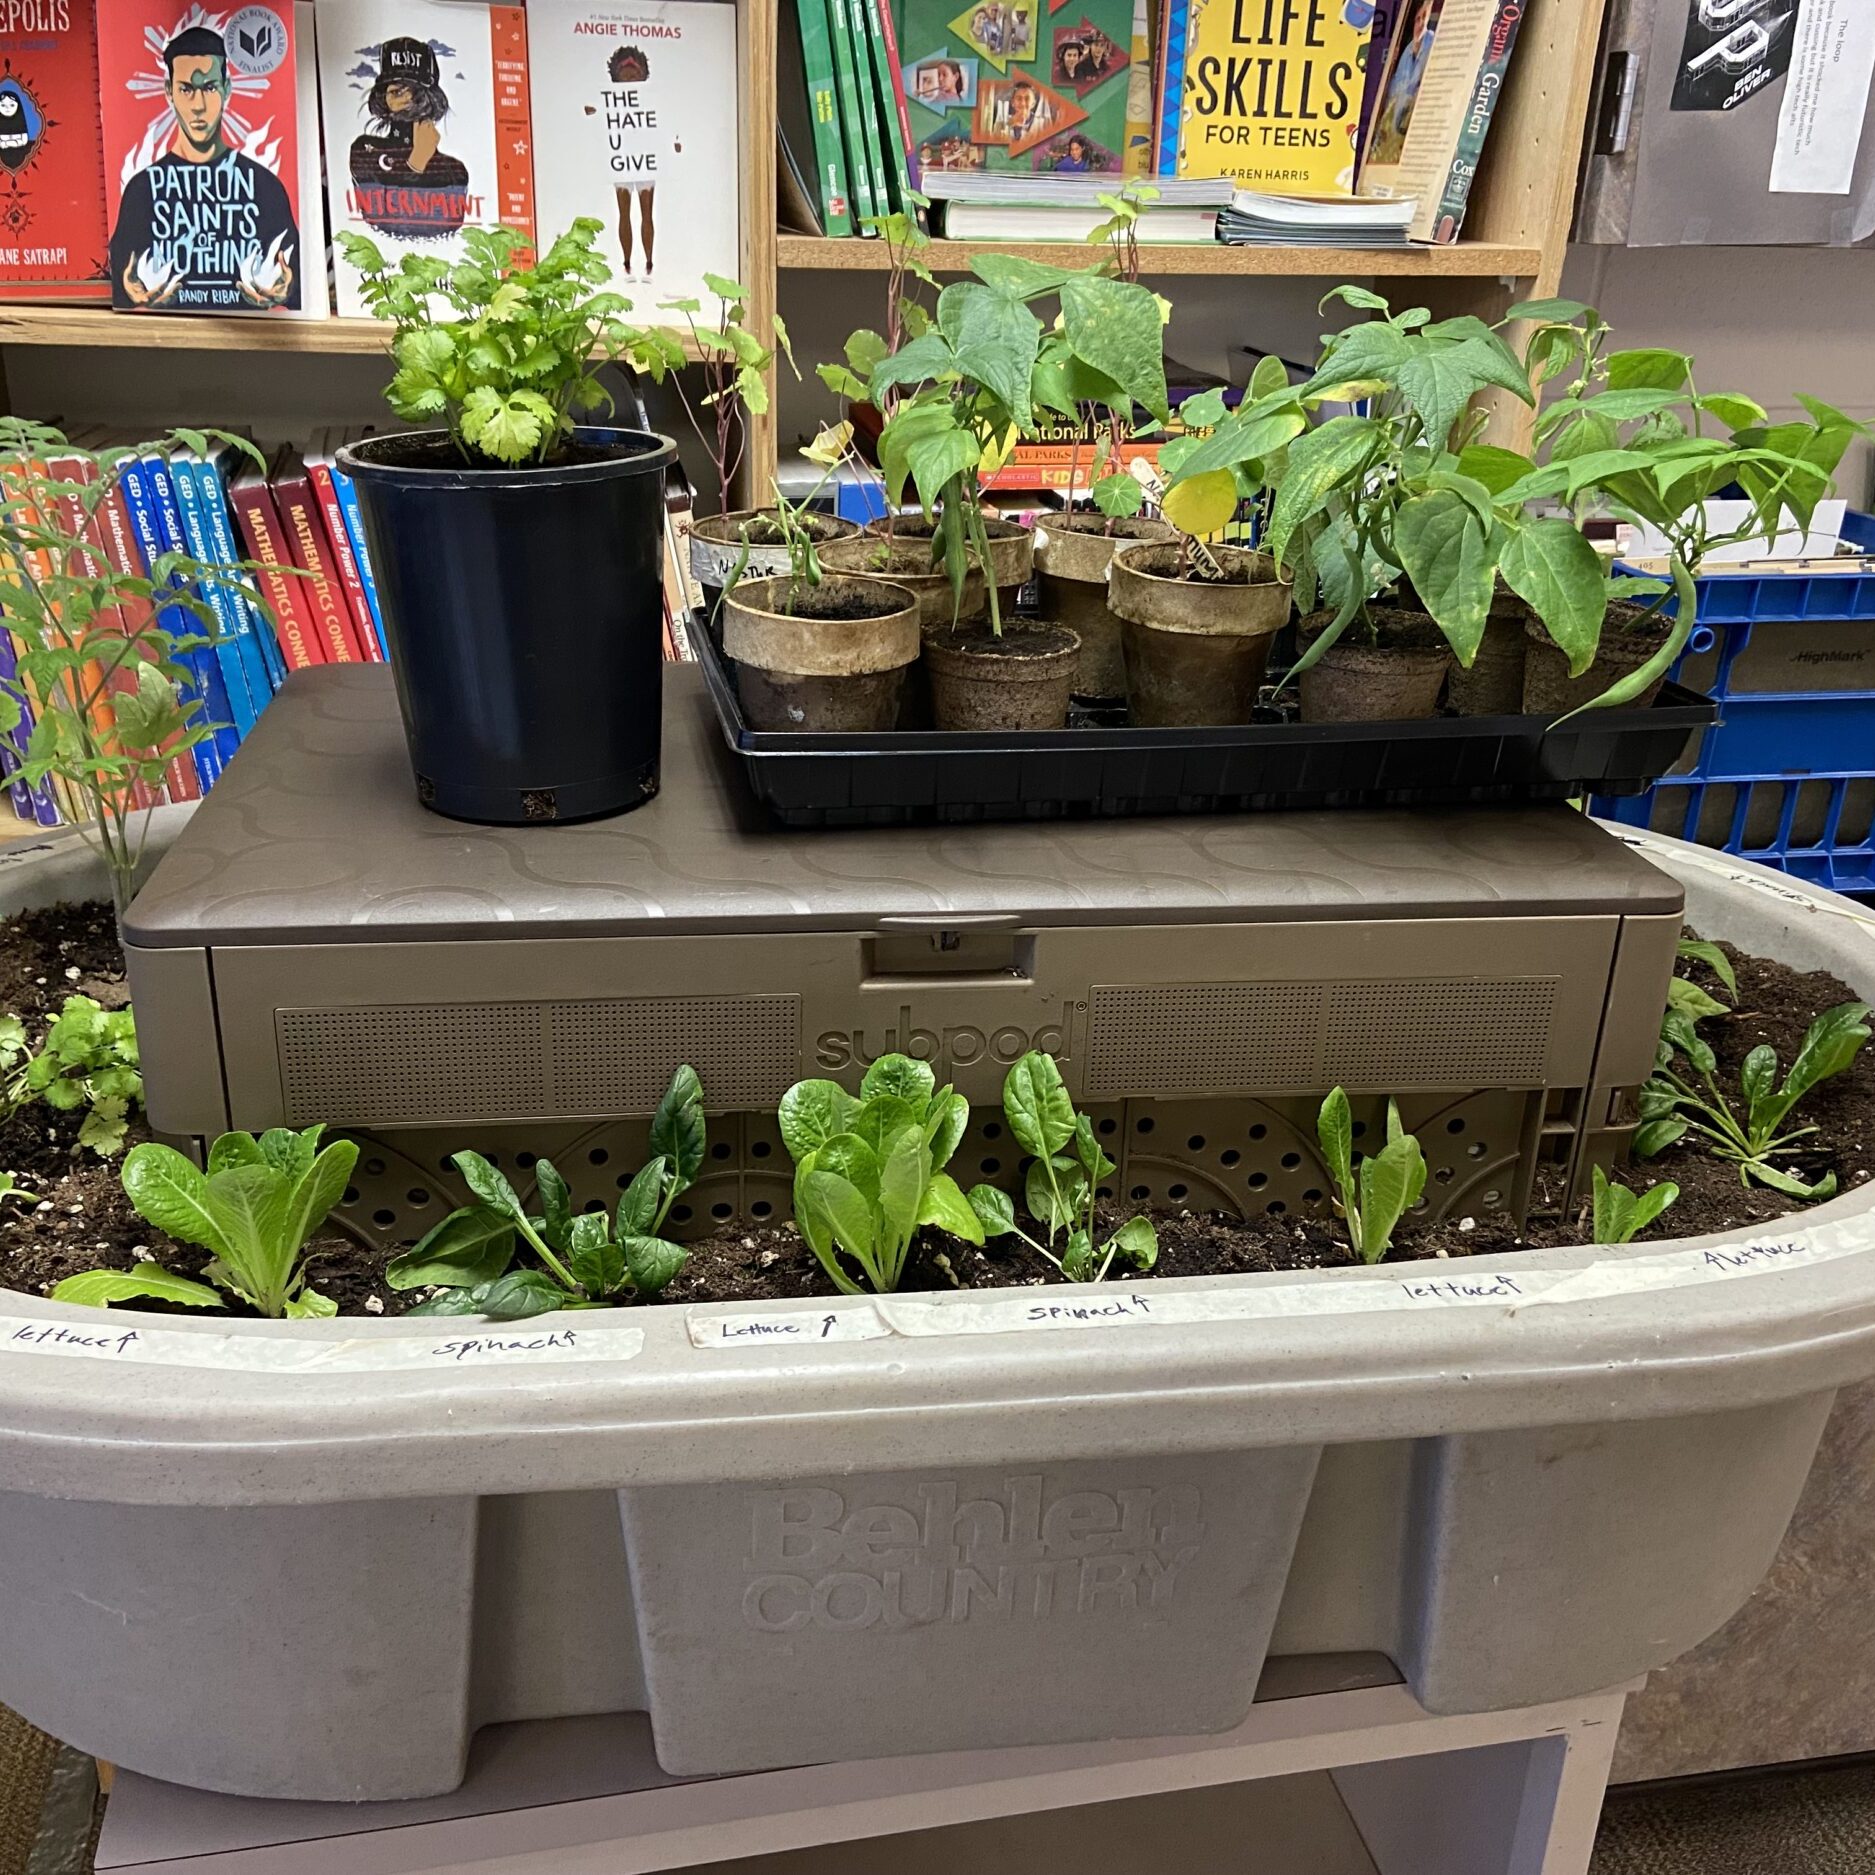 A subpod garden compost with herb plants inside a room with books on a shelf behind it